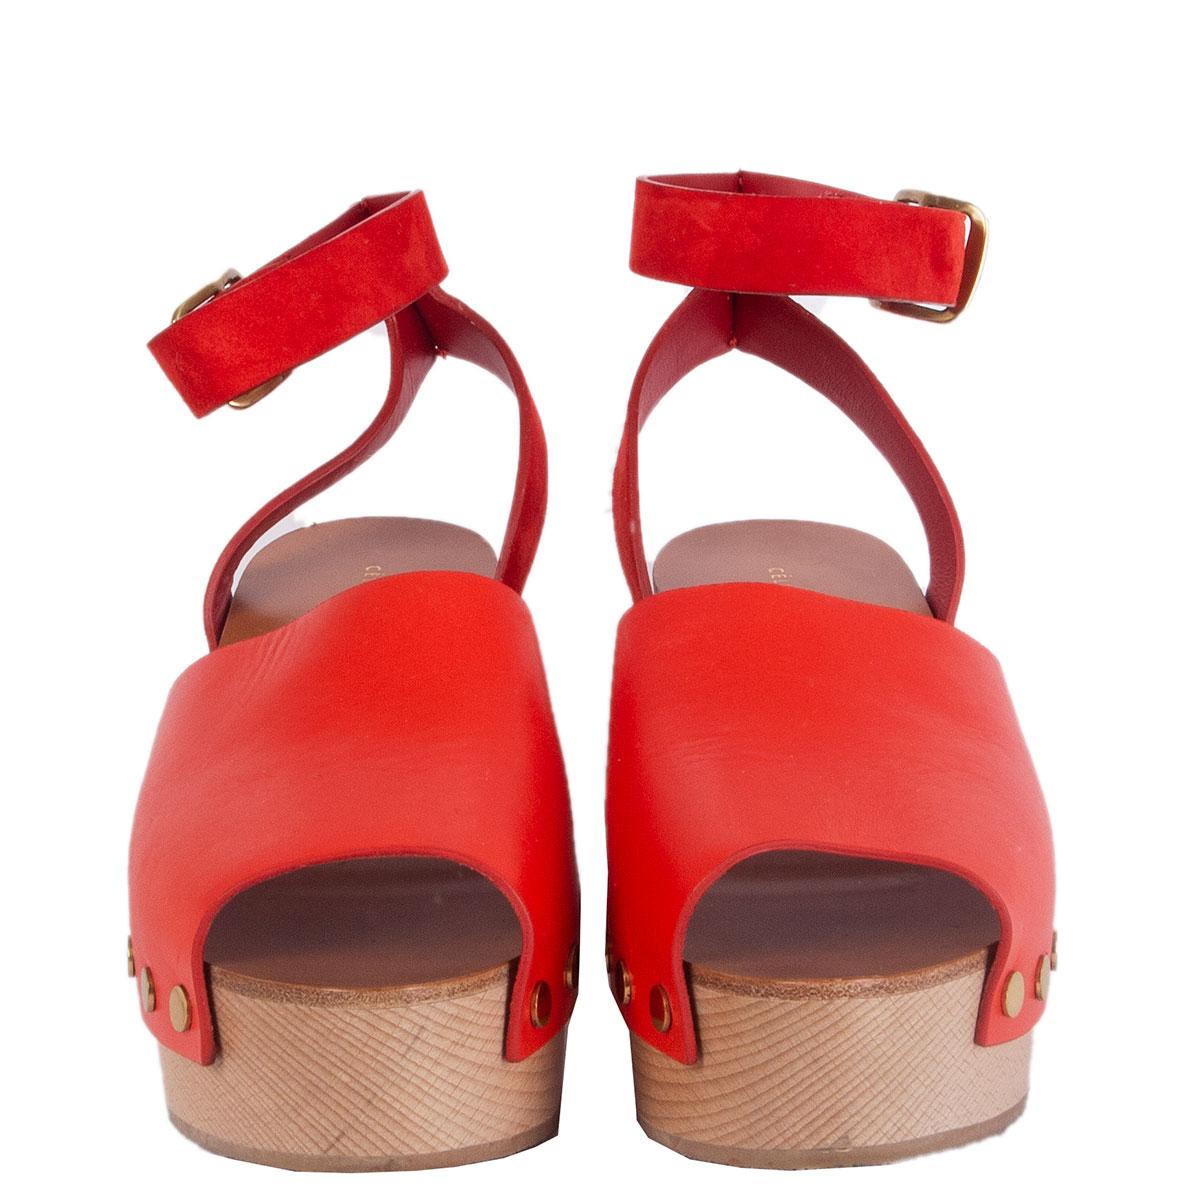 100% authentic Céline clog open toe sandals in red calfskin with a beige wooden sole featuring gold-tone studs. Have been worn once and are in virtually new condition. 

Measurements
Imprinted Size	39
Shoe Size	39
Inside Sole	25.5cm